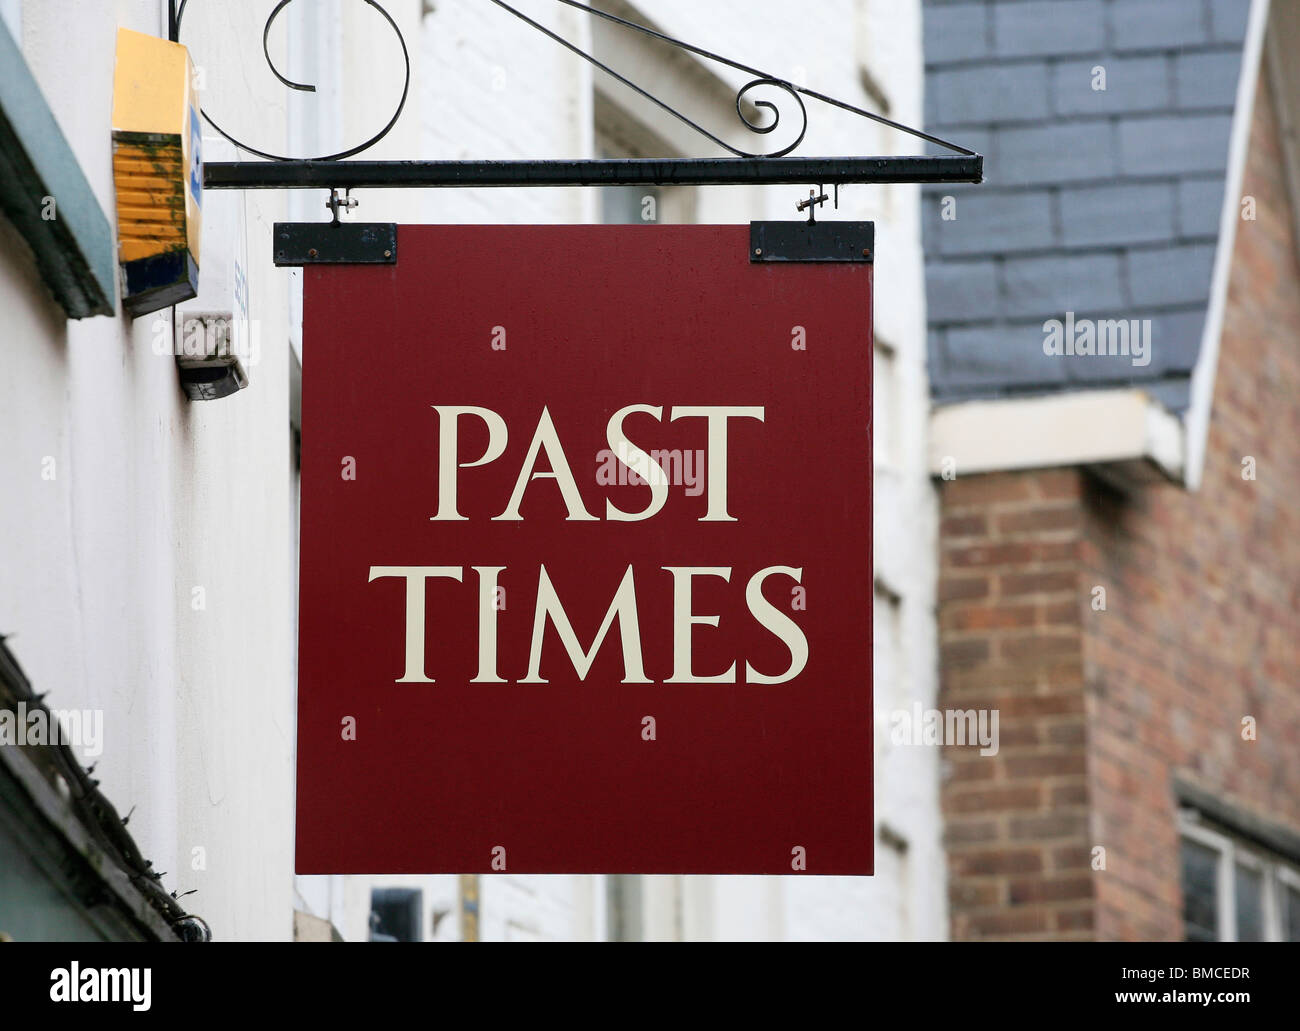 Past Times Stock Photo